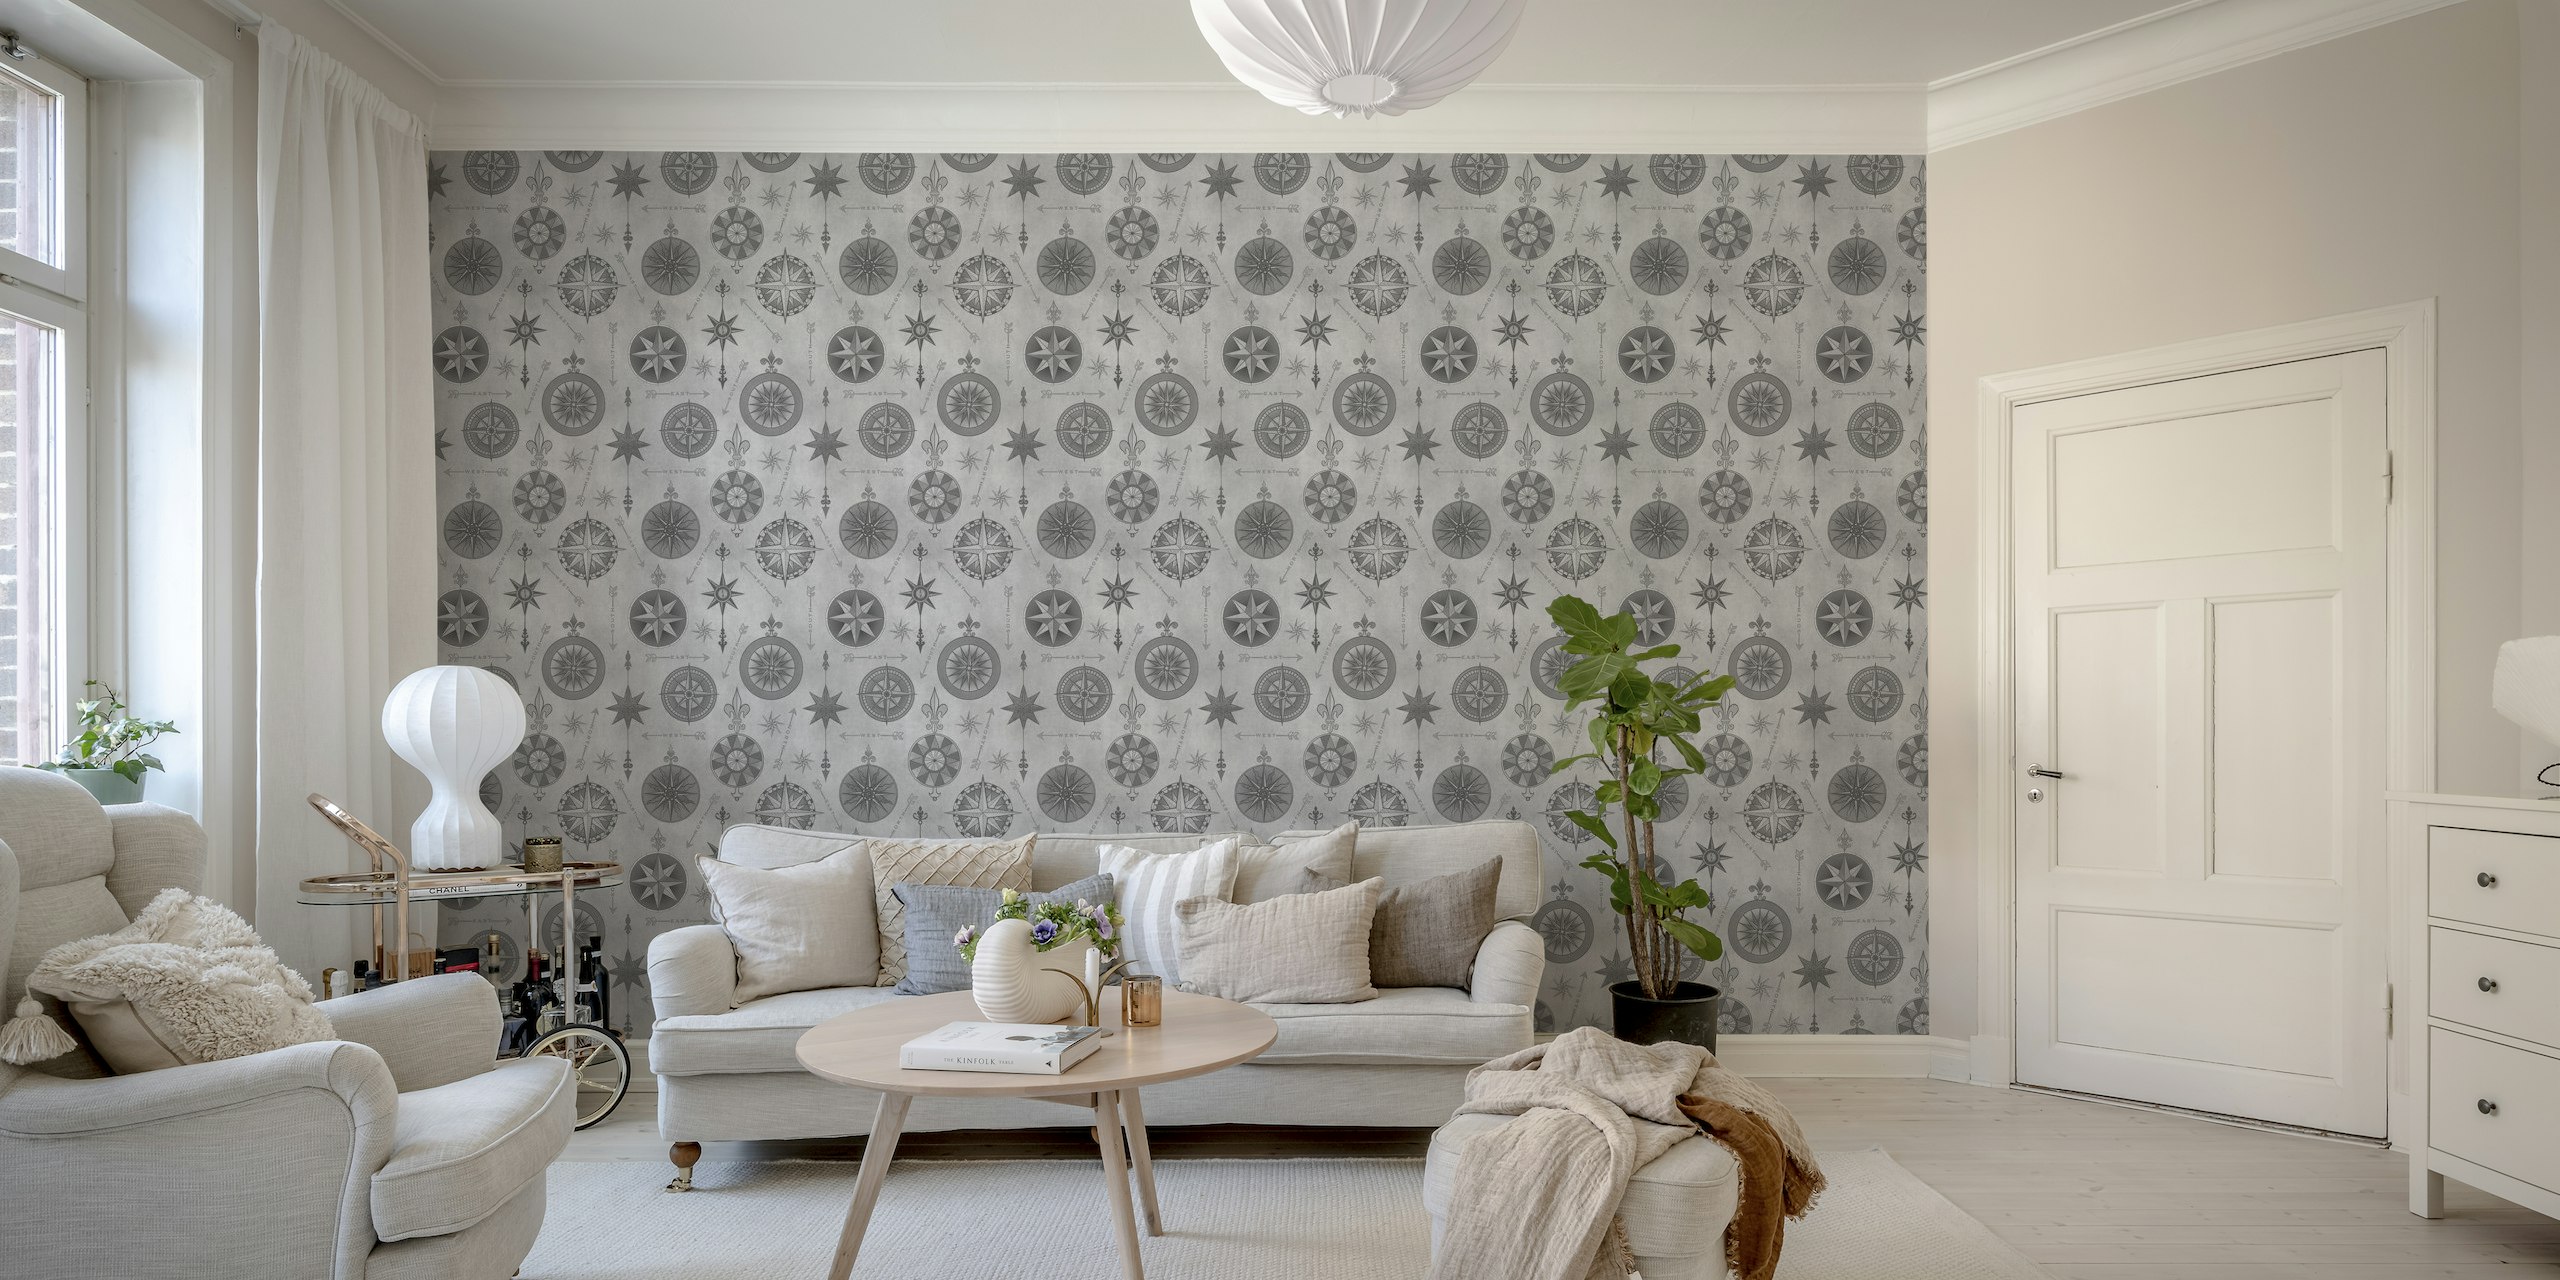 Vintage compass pattern wall mural on a grey background